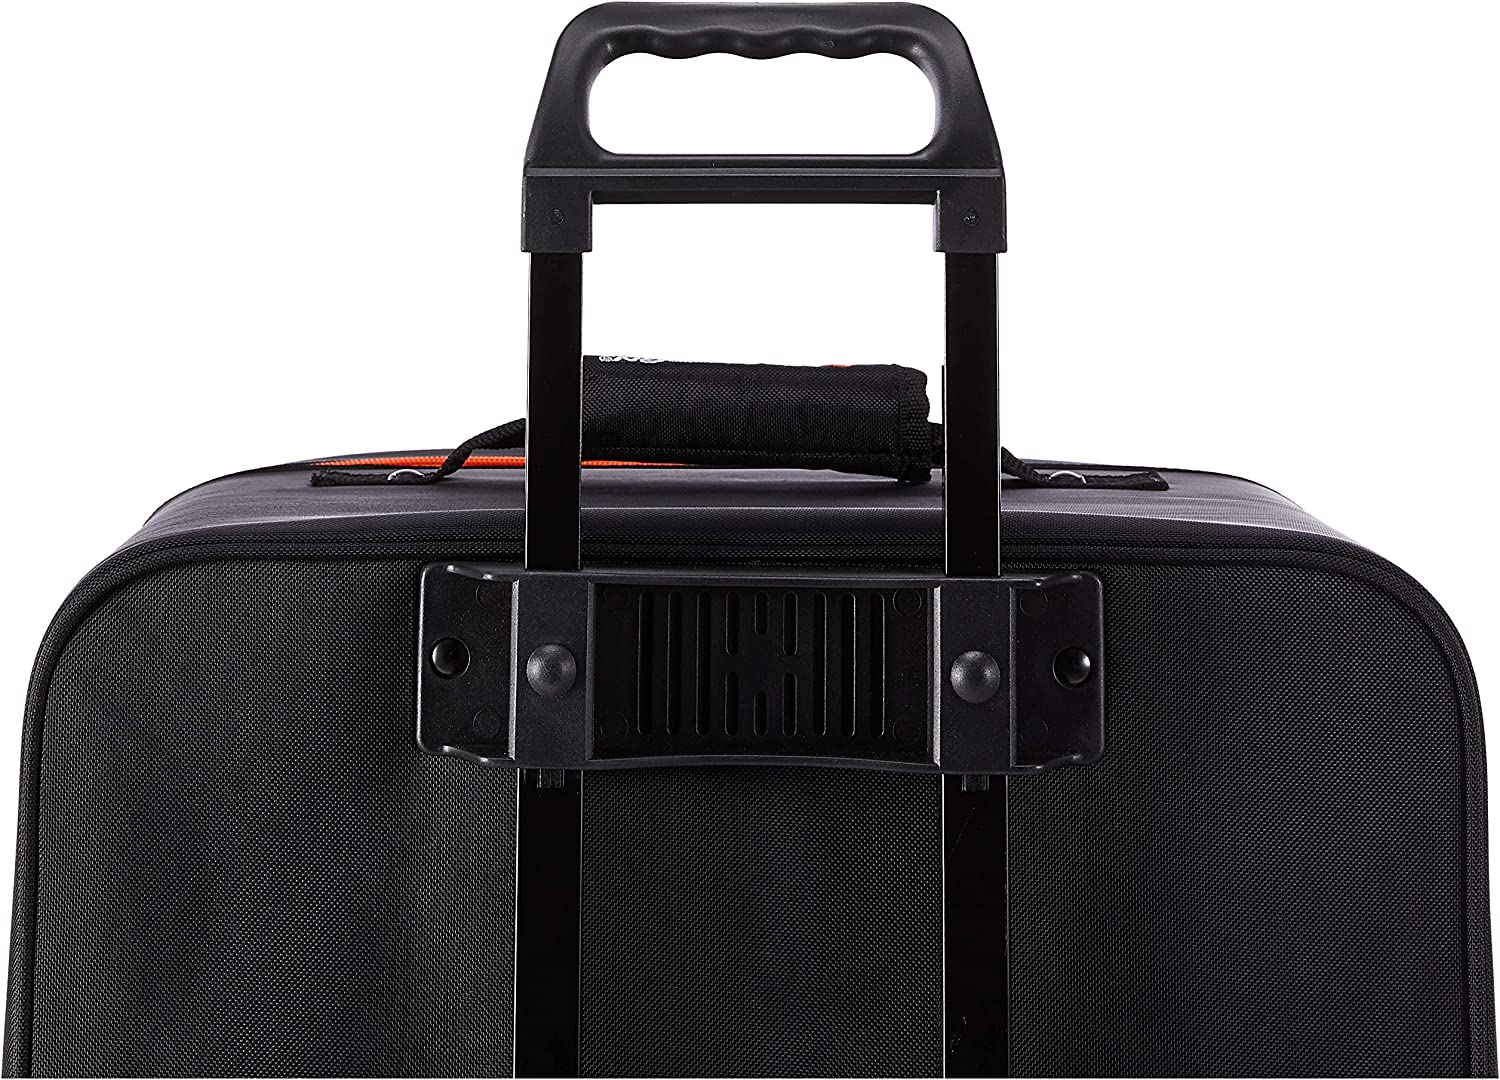 Celestron 94004 Deluxe Carry Case for NexStar 8, 9.25 and 11 inch Optical Tubes